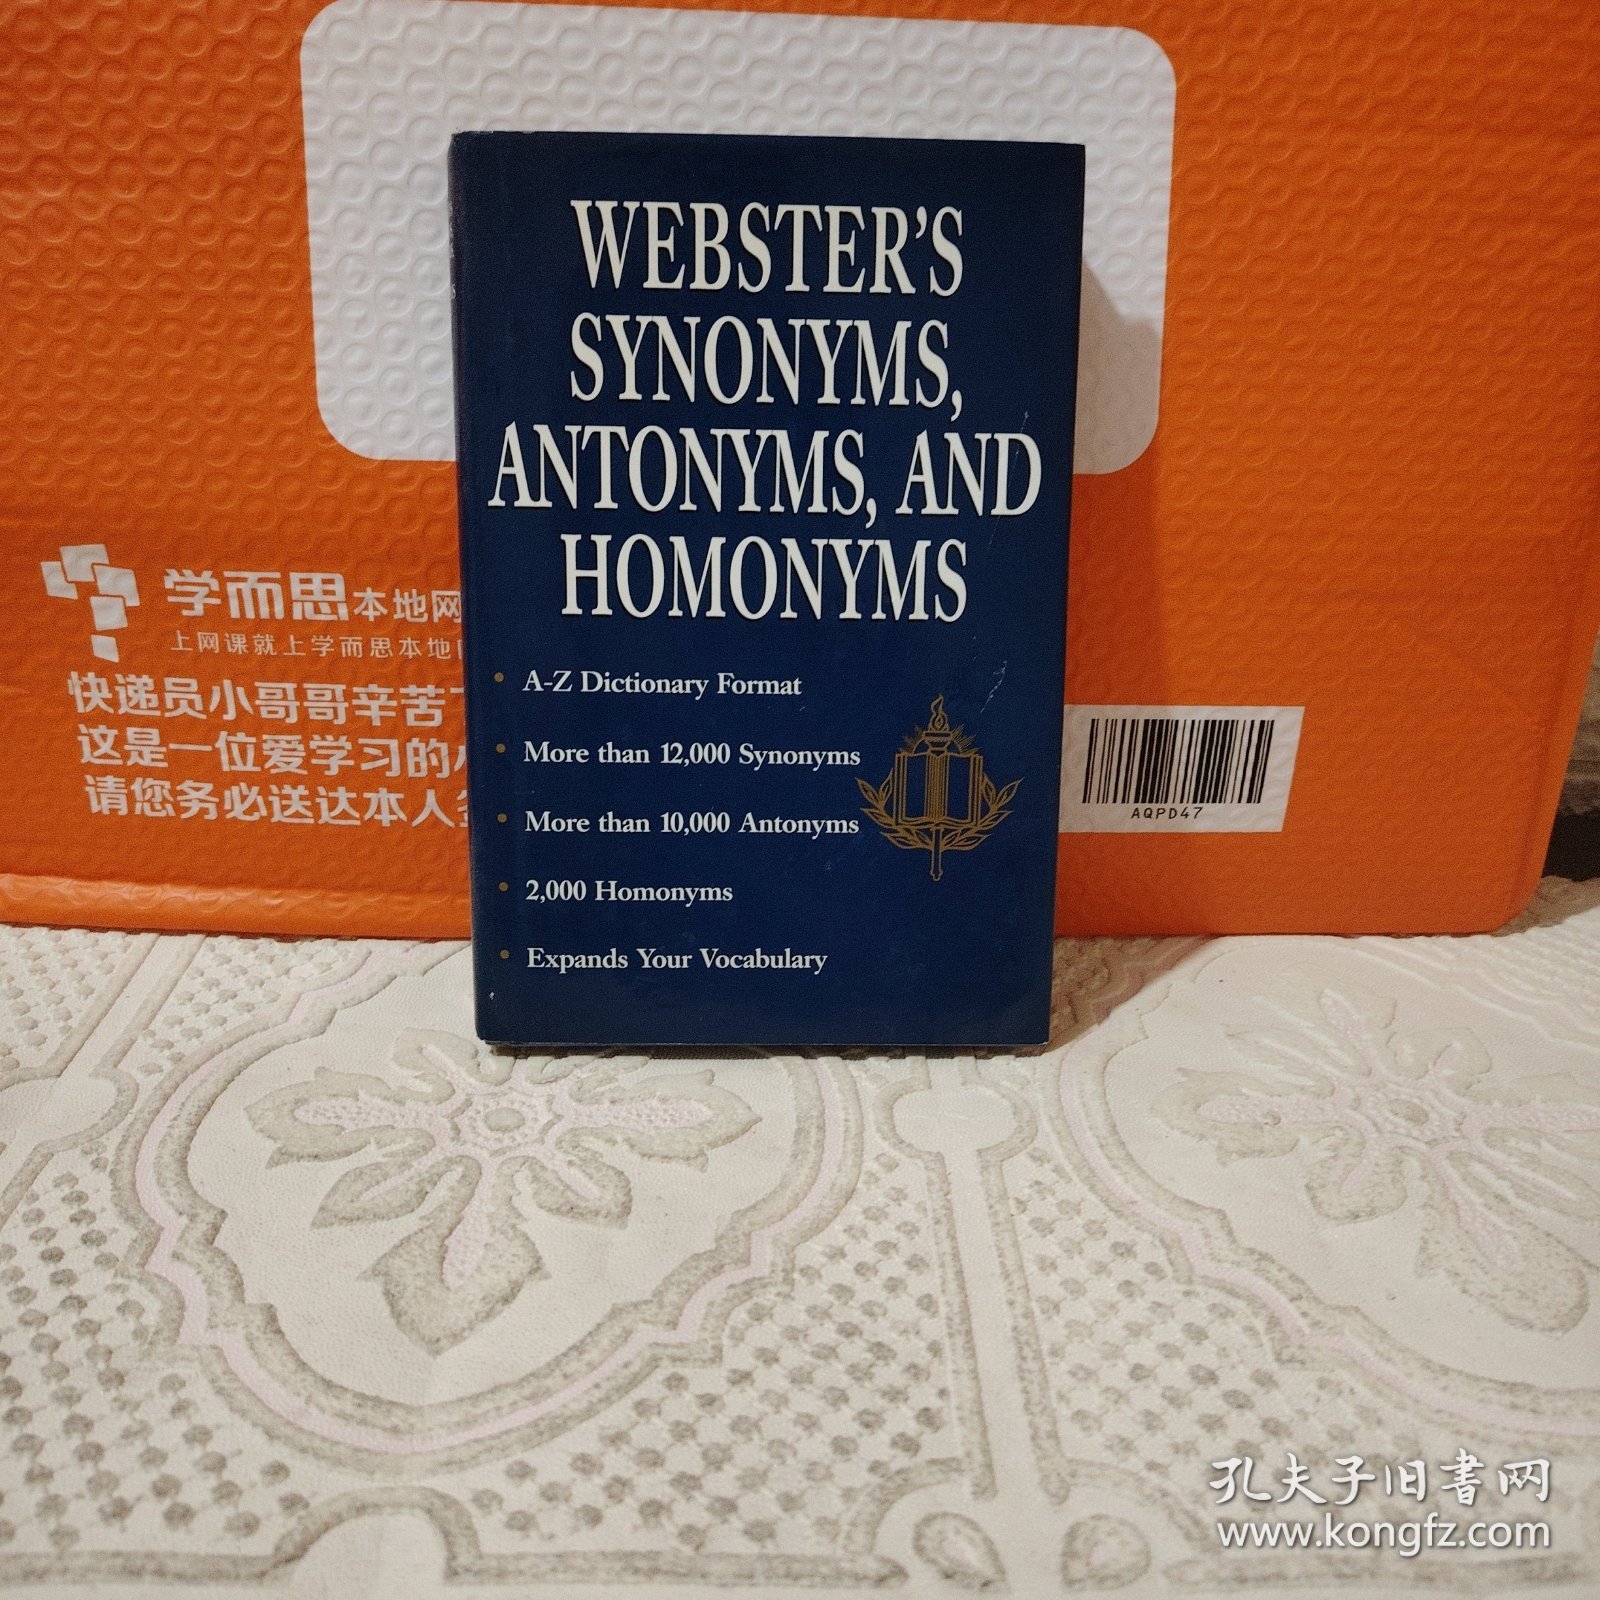 WEBSTER'S SYNONYMS ANTONYMS, AND HOMONYMS A-Z Dictionary Format More than 12000 Synonyms More than 10000 Antonyms ·2.000 Homonyms Expands Your Vocabulary 跟读